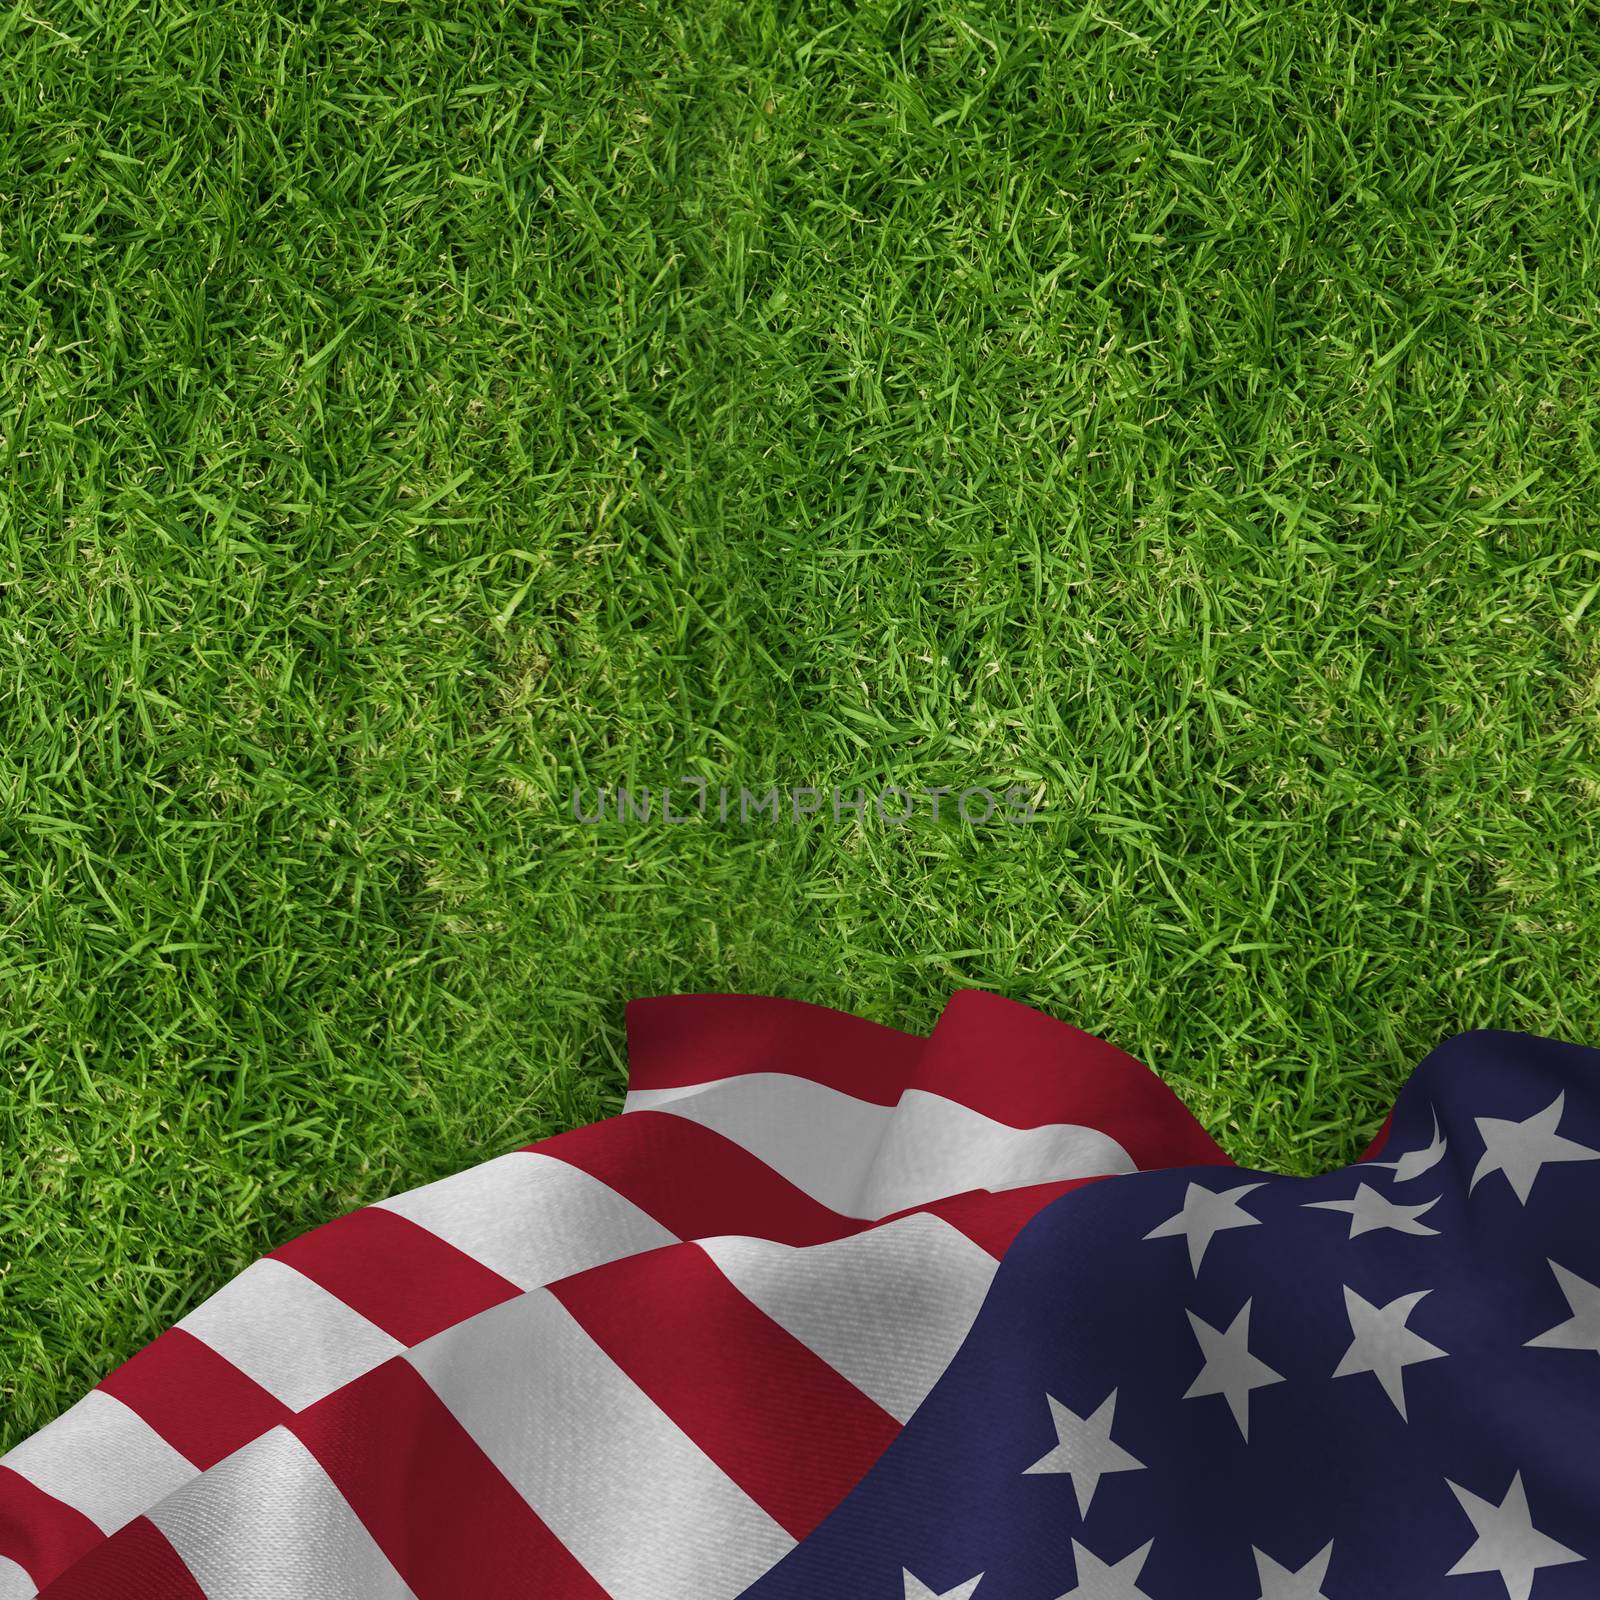 Close up of the us flag against closed up view of grass